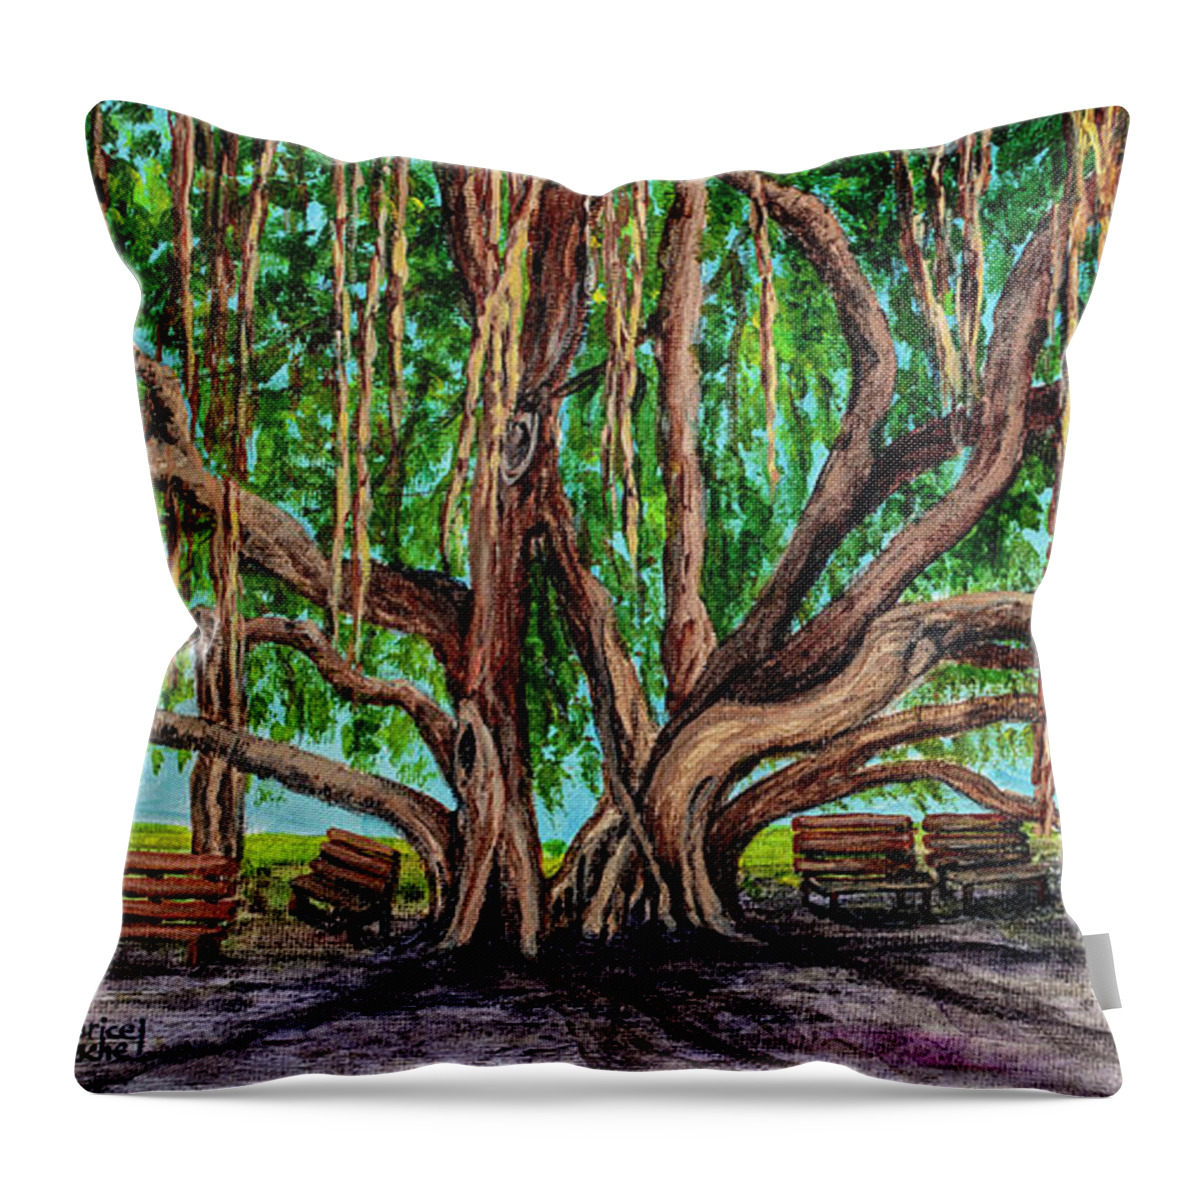 Banyan Tree Park Throw Pillow featuring the painting Banyan Tree Park by Darice Machel McGuire